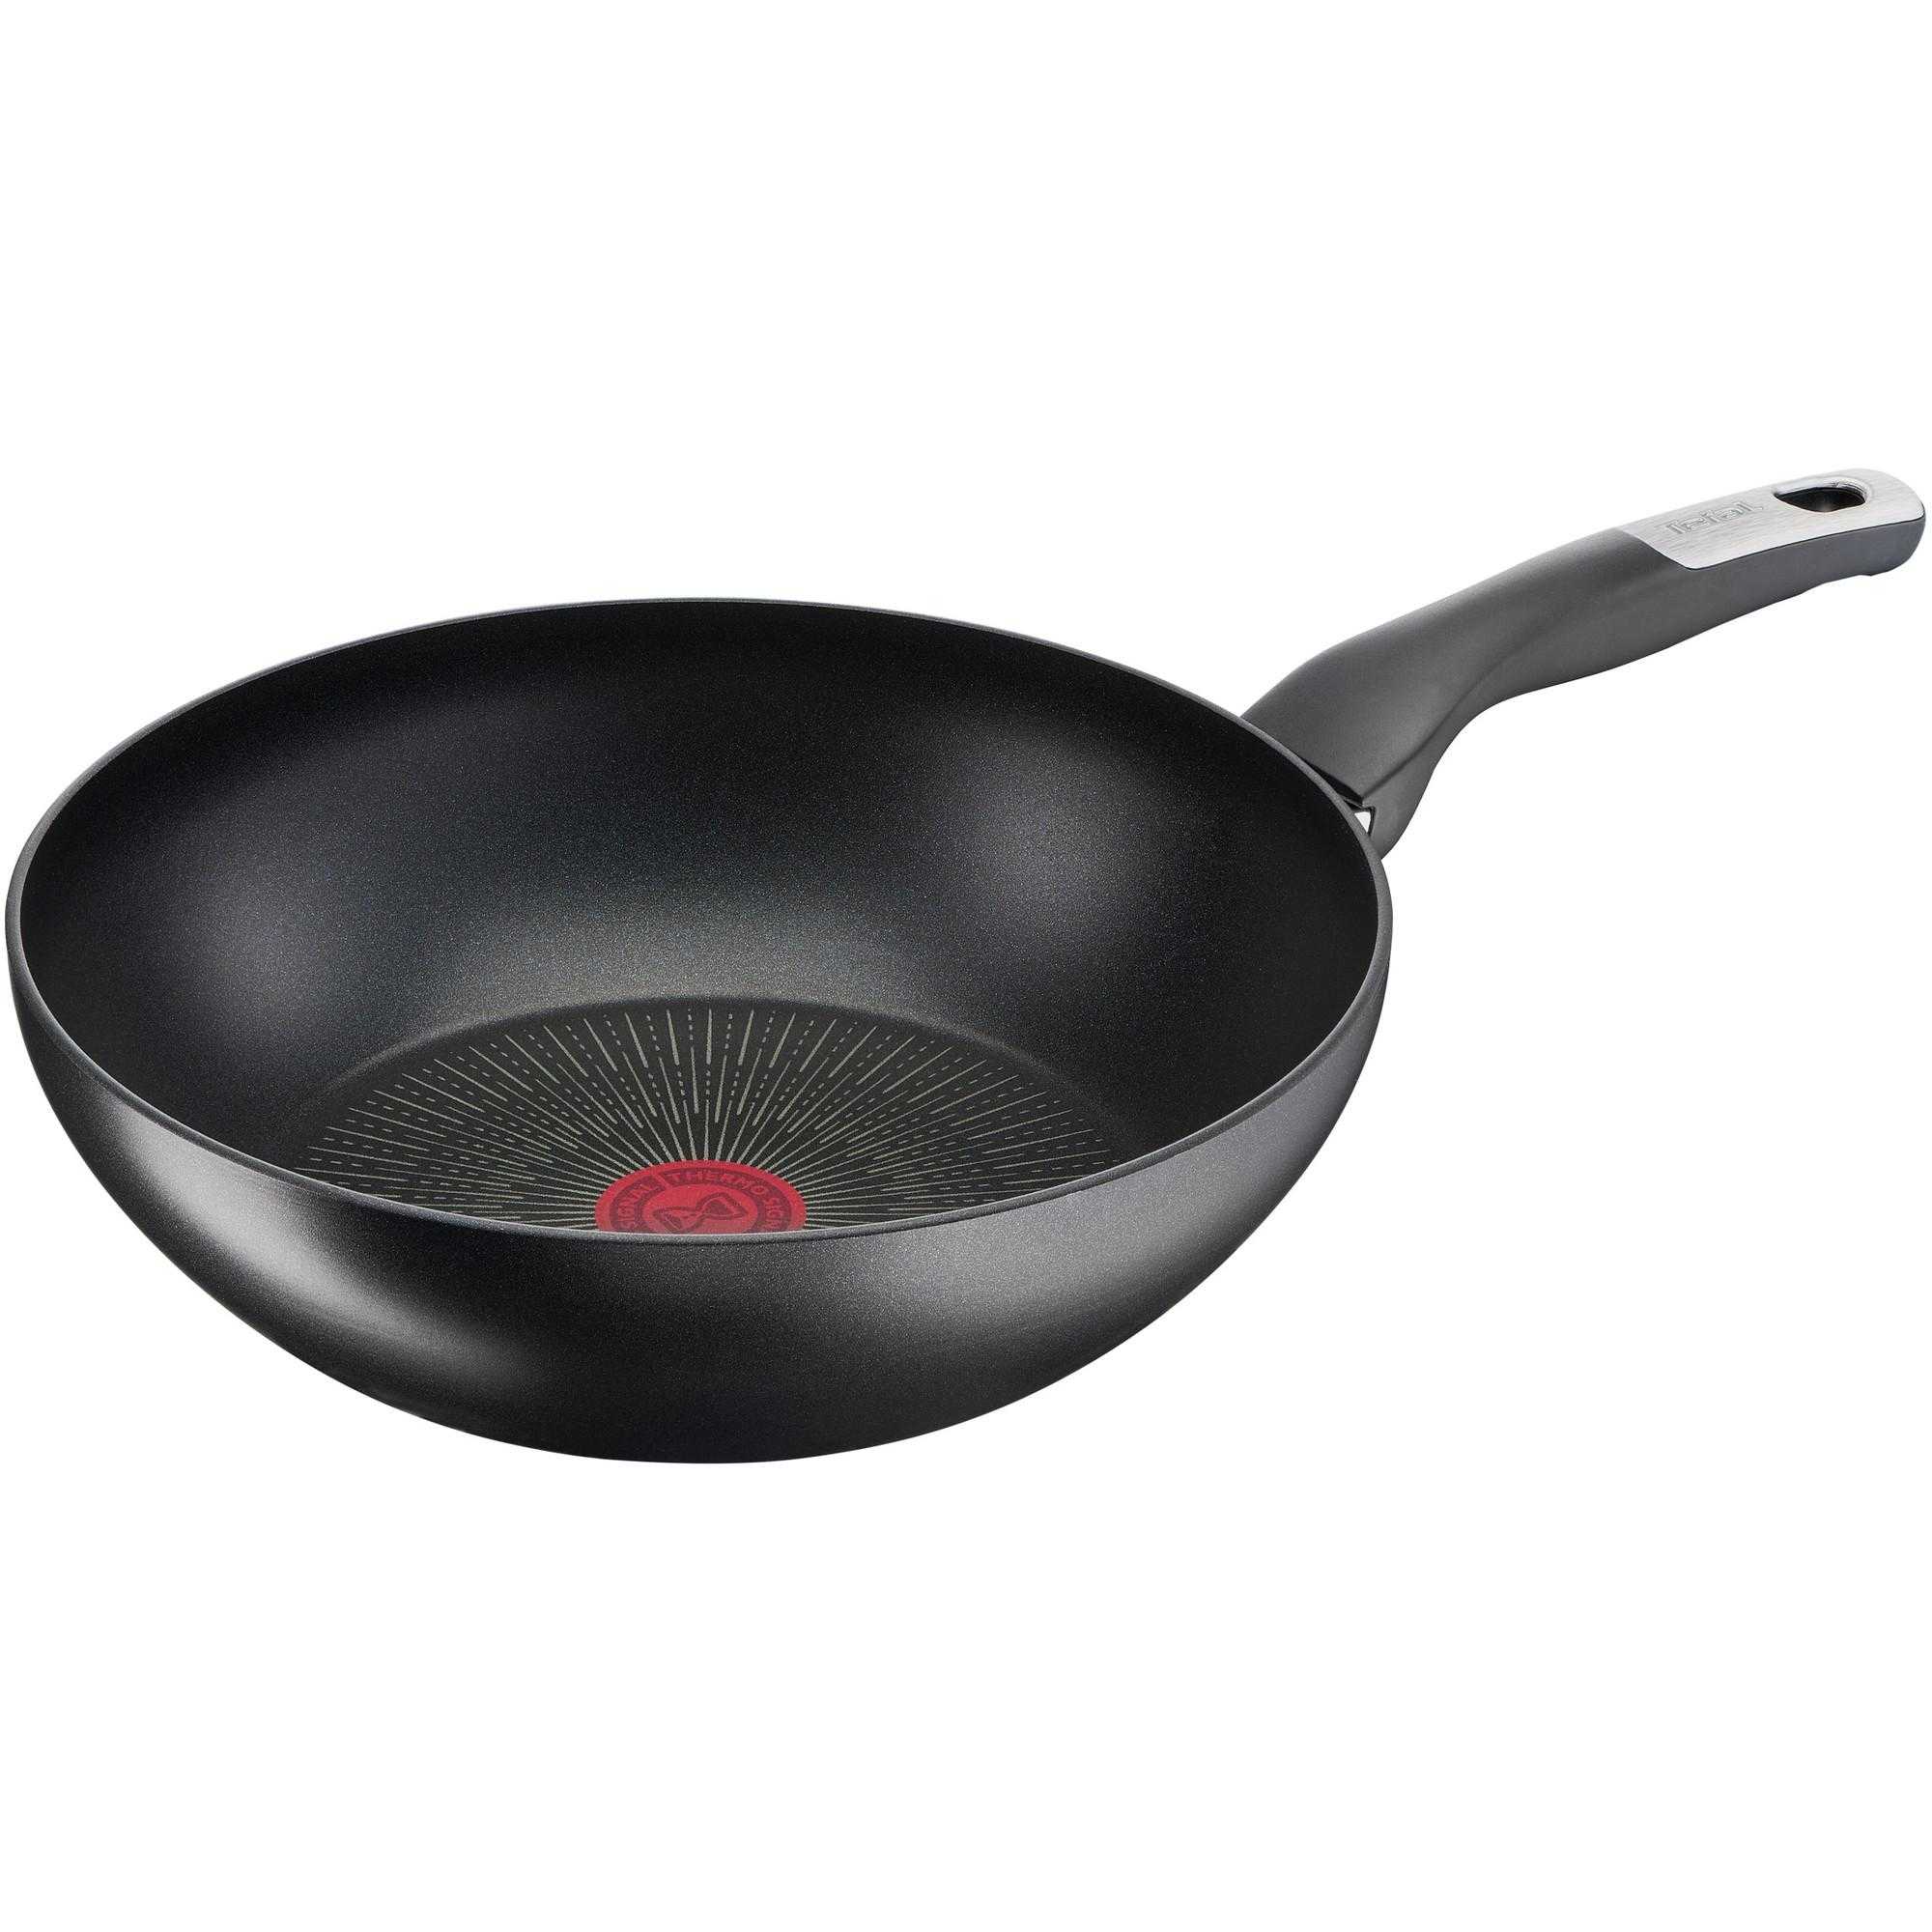 Tigaie cu maner wok Tefal Unlimited G2551972, 28 cm, indicator Thermo Signal, inductie